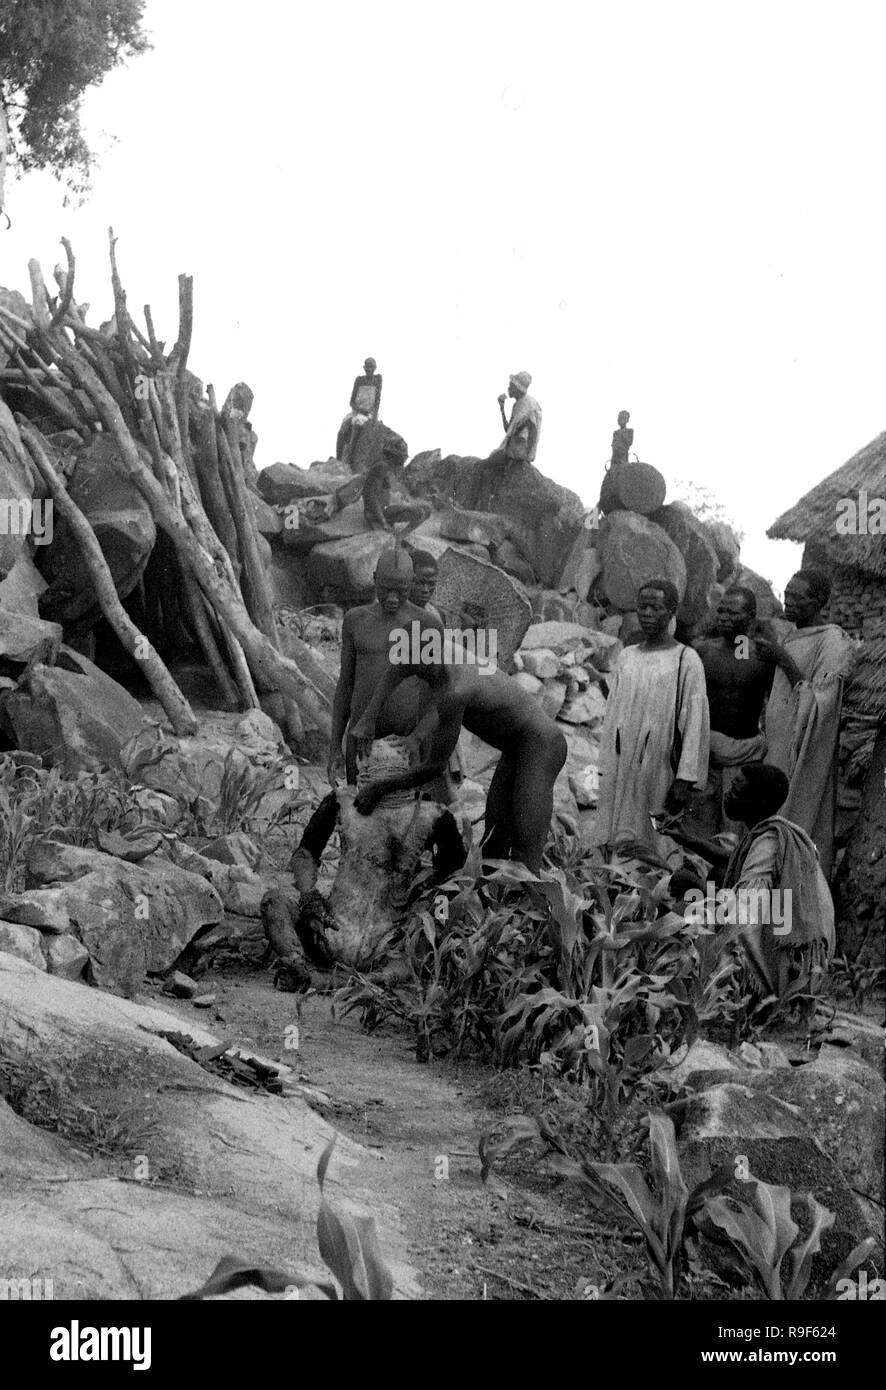 1950's Native Tribes People, Cameroon Africa Stock Photo